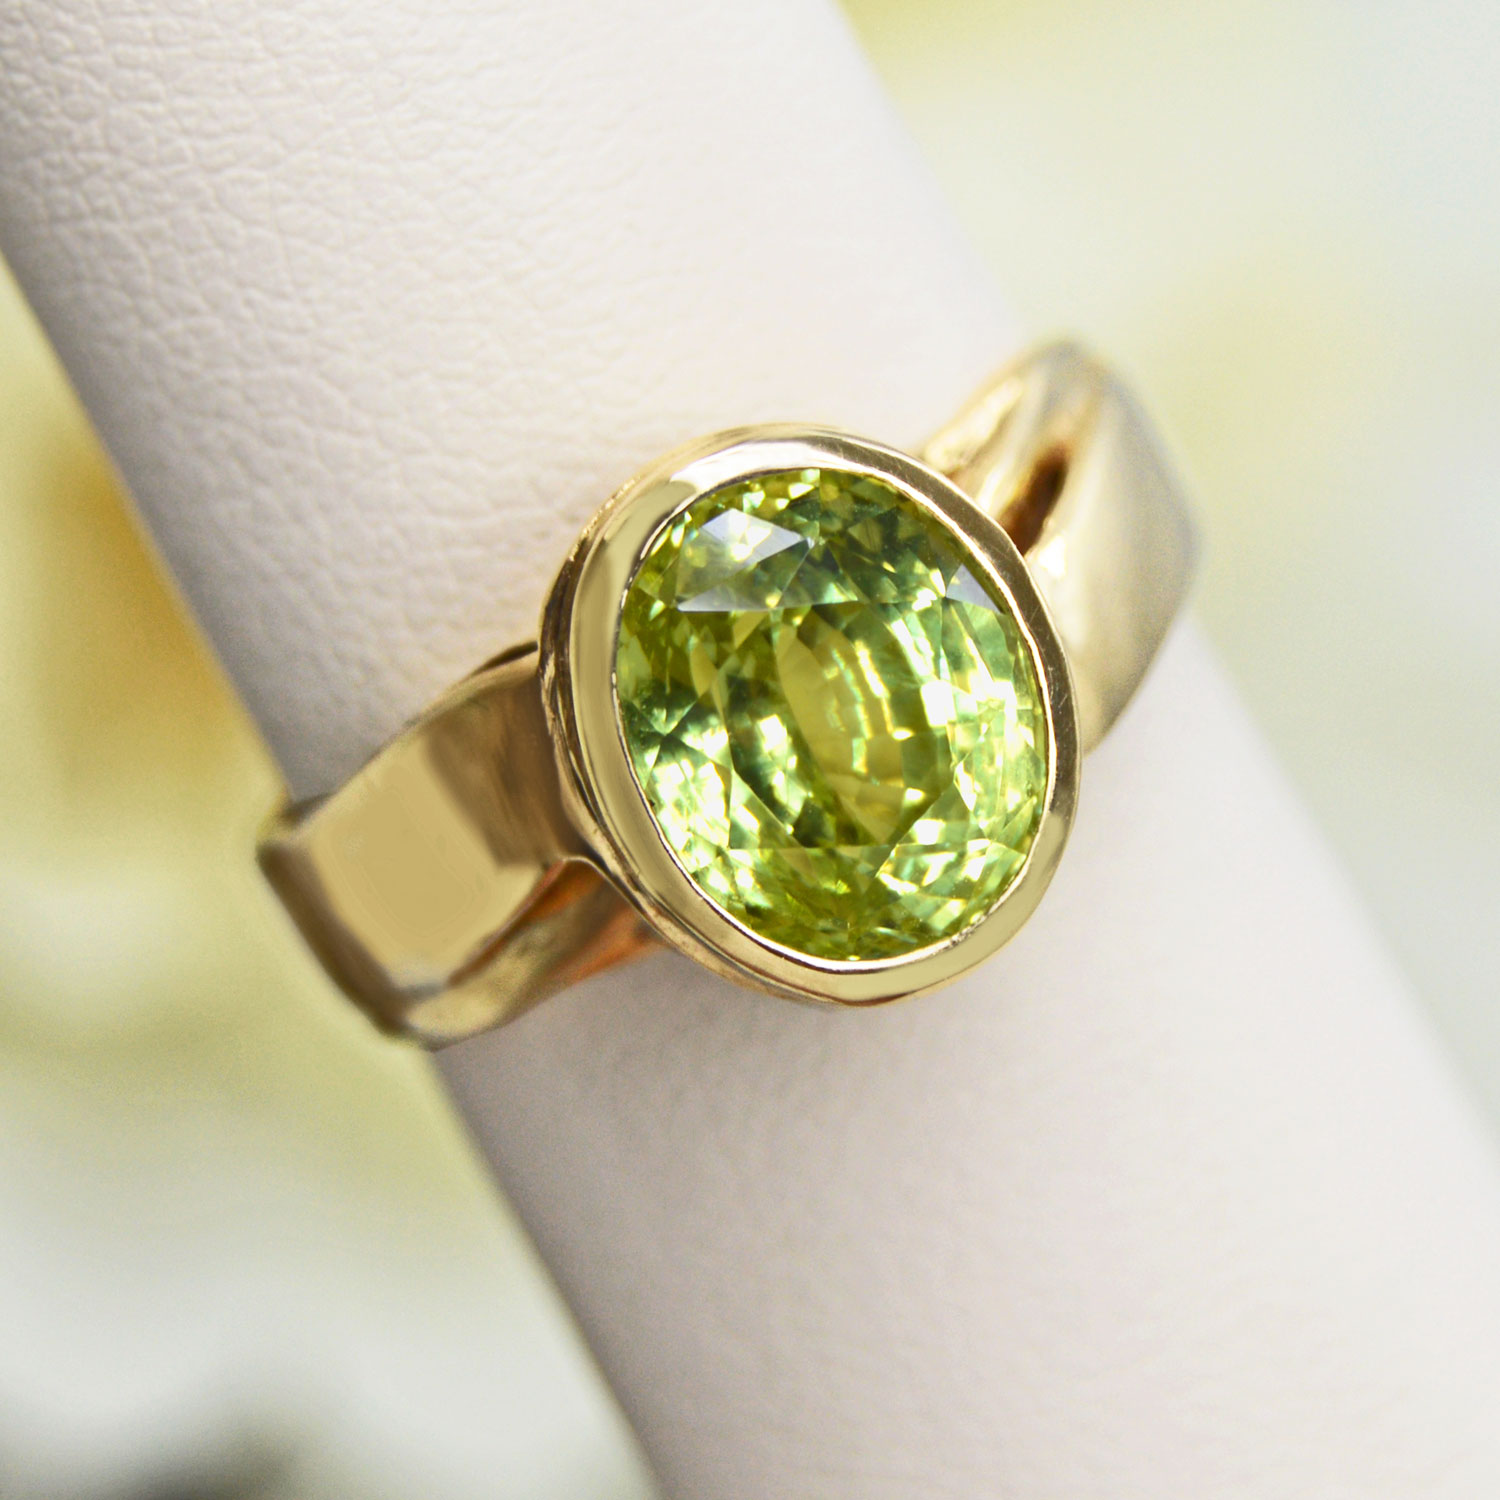 Faceted Chrysoberyl gemstone, bezel-set in a 14Kt yellow gold ring.